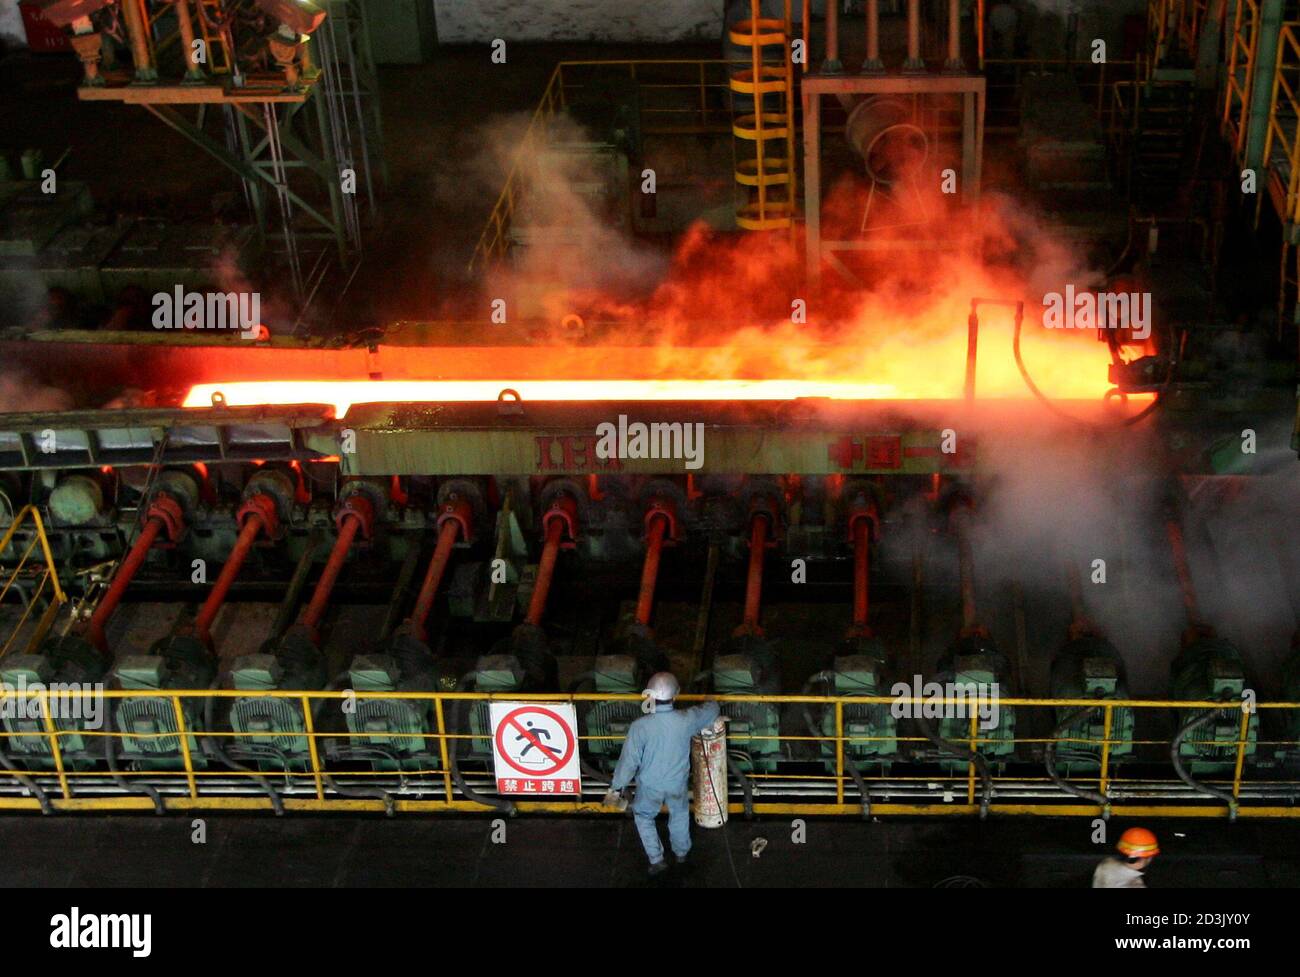 A Chinese worker operates a machine for hot-rolled steel at Baosteel factory in Shanghai February 25, 2005. China, the world's top steel producer, is expected to see steel output growth fall by half this year as mills focus on higher quality steel for ship building and trim output for construction, Xie Qihua, chairwoman of China's largest steel maker Baosteel Group said on Friday. REUTERS/Claro Cortes IV  CC/TC Stock Photo